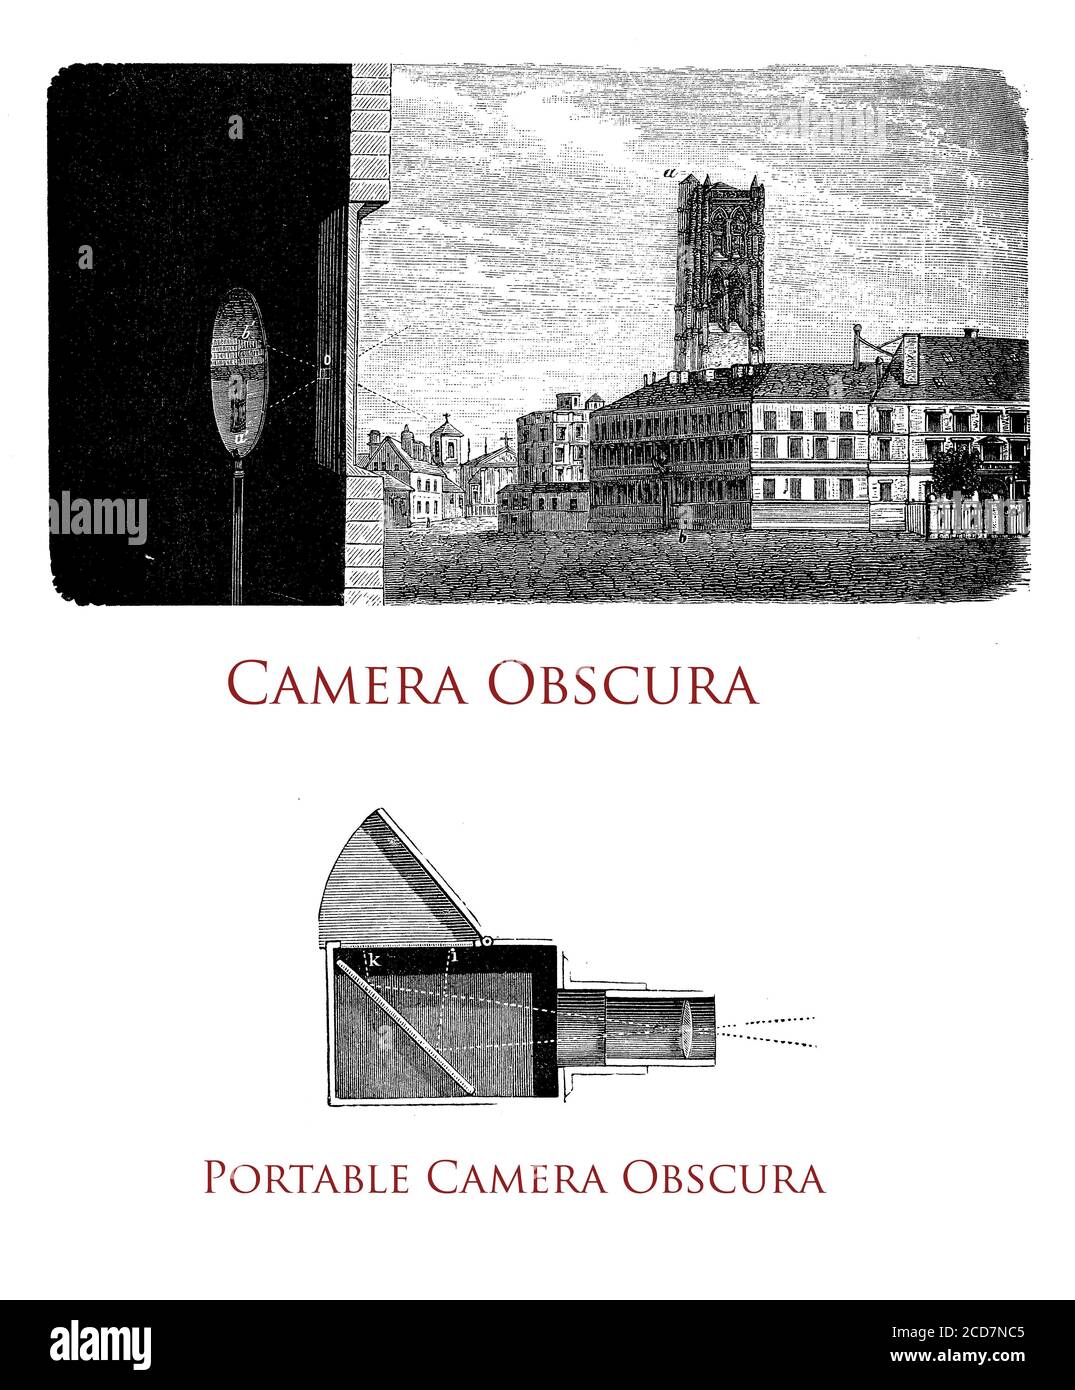 Camera obscura: a scene is projected reversed and inverted on a screen through a small hole, color and perspective preserved. Camera oscura with a lens was further developed as photographic camera Stock Photo